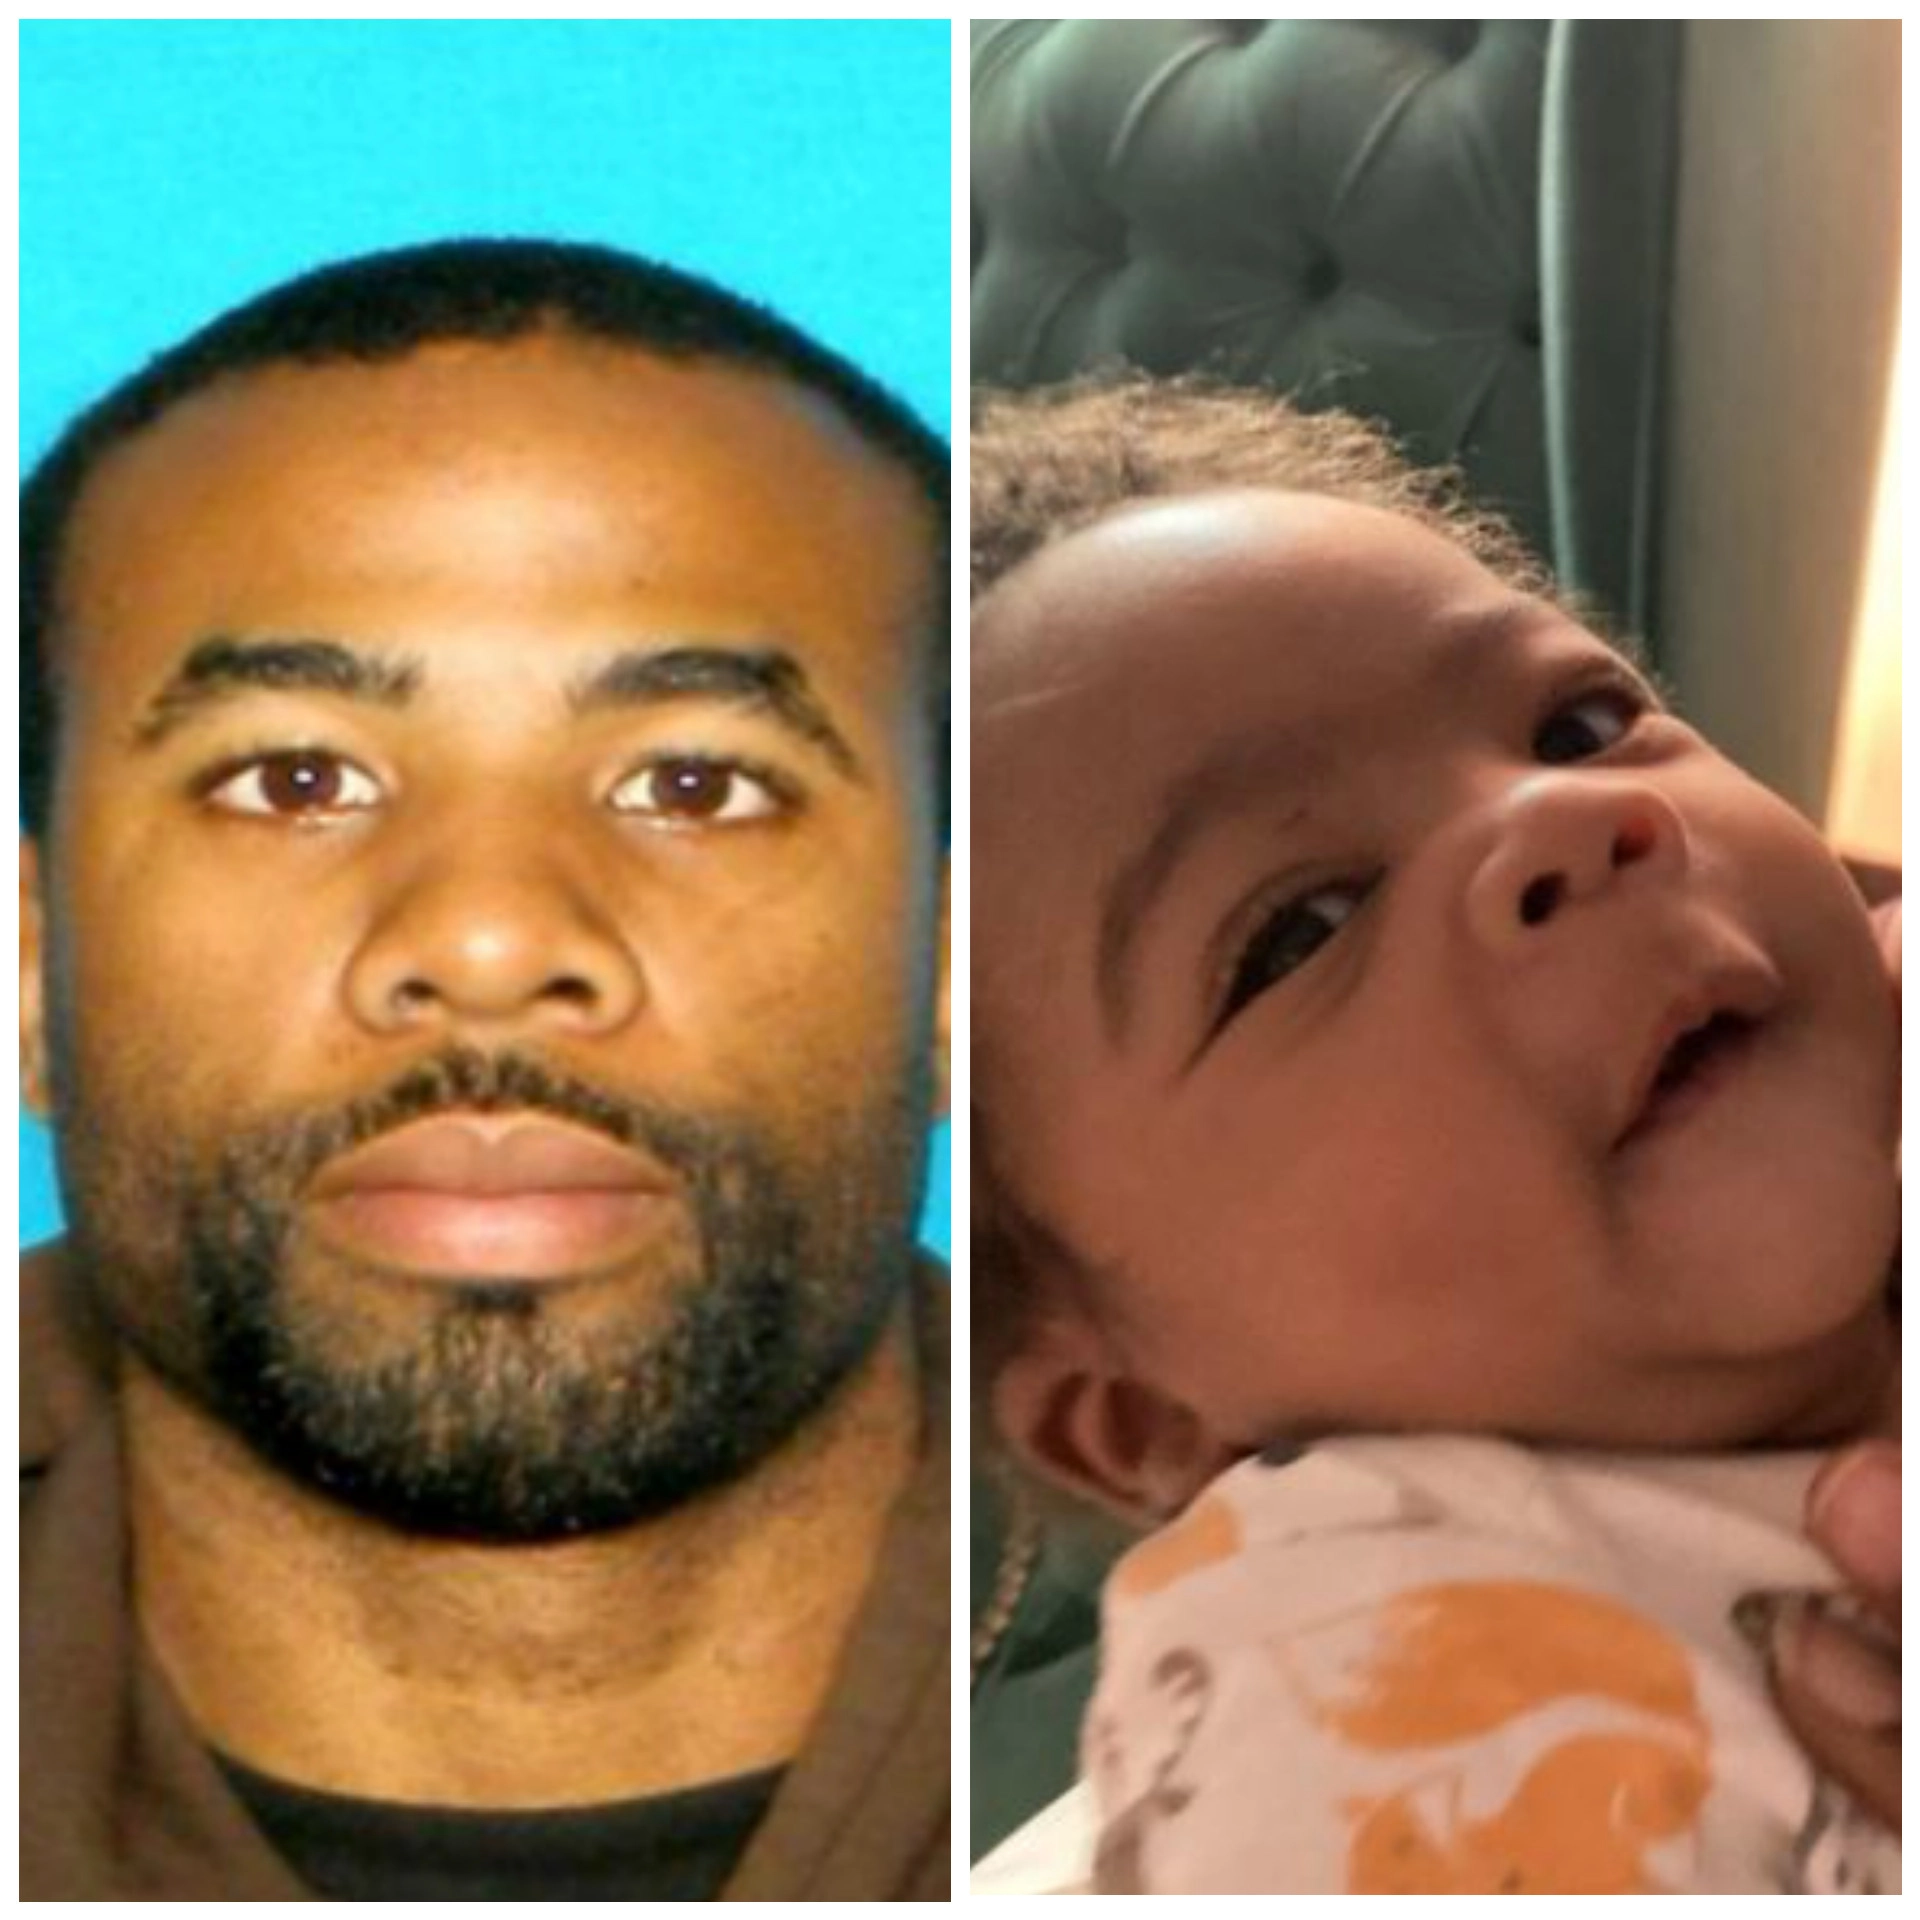 Nigerian man, Obinna Igbokwe decleared wanted after shooting wife, killing her grandmother before fleeing with 3-month-old son in Texas, Nigerian man, Obinna Igbokwe decleared wanted after shooting wife, killing her grandmother before fleeing with 3-month-old son in Texas, INFINITY LOADED